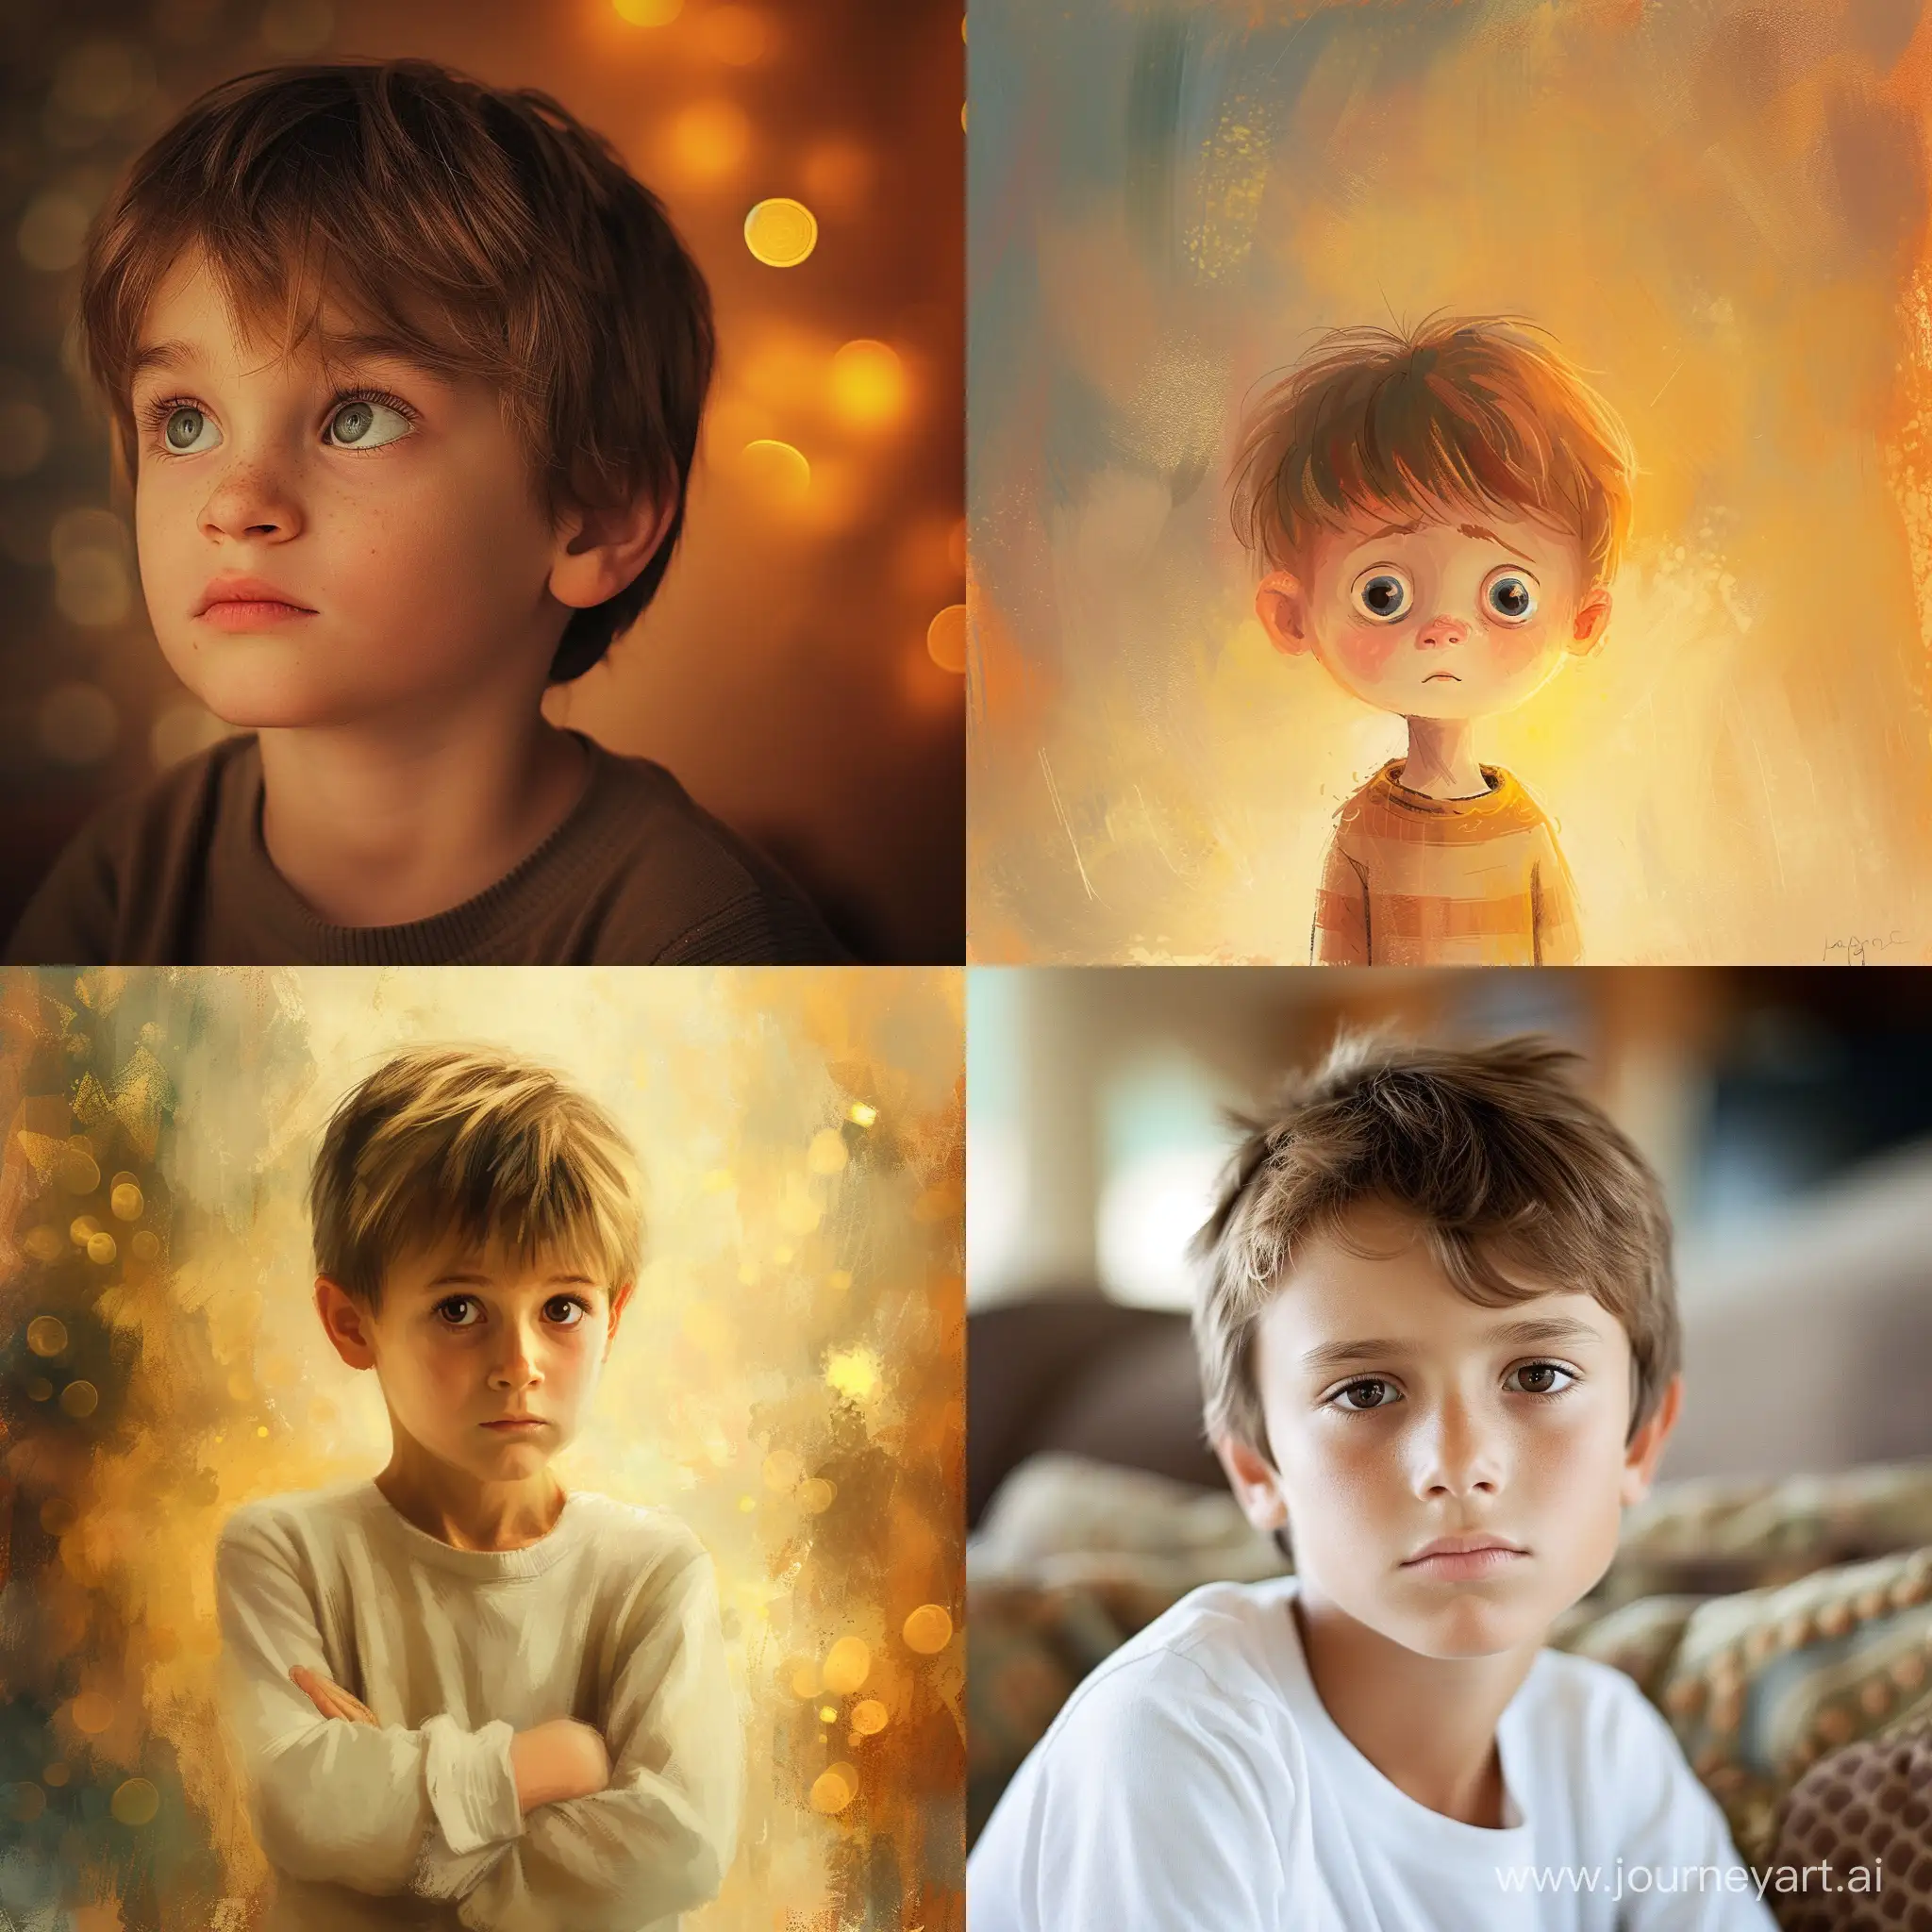 boy looking apprehensive yet in a gentle and soft style –warm colors, friendly ambiance, comforting background